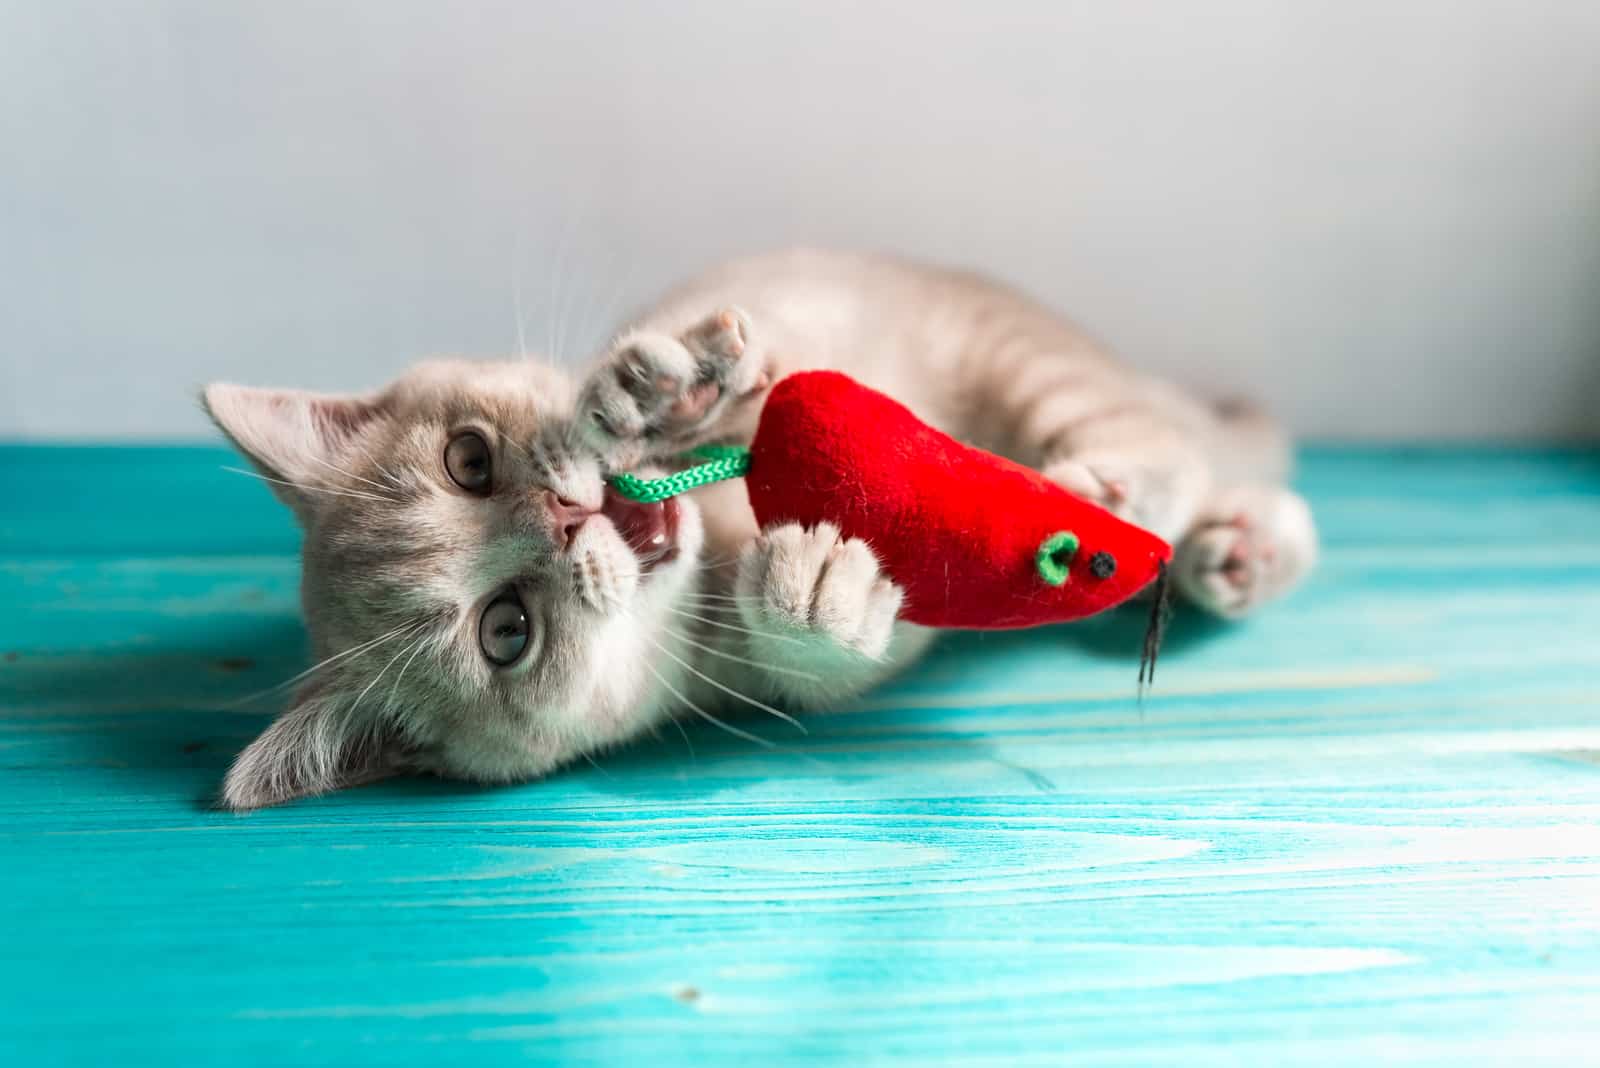 kitten plays with a red toy mouse